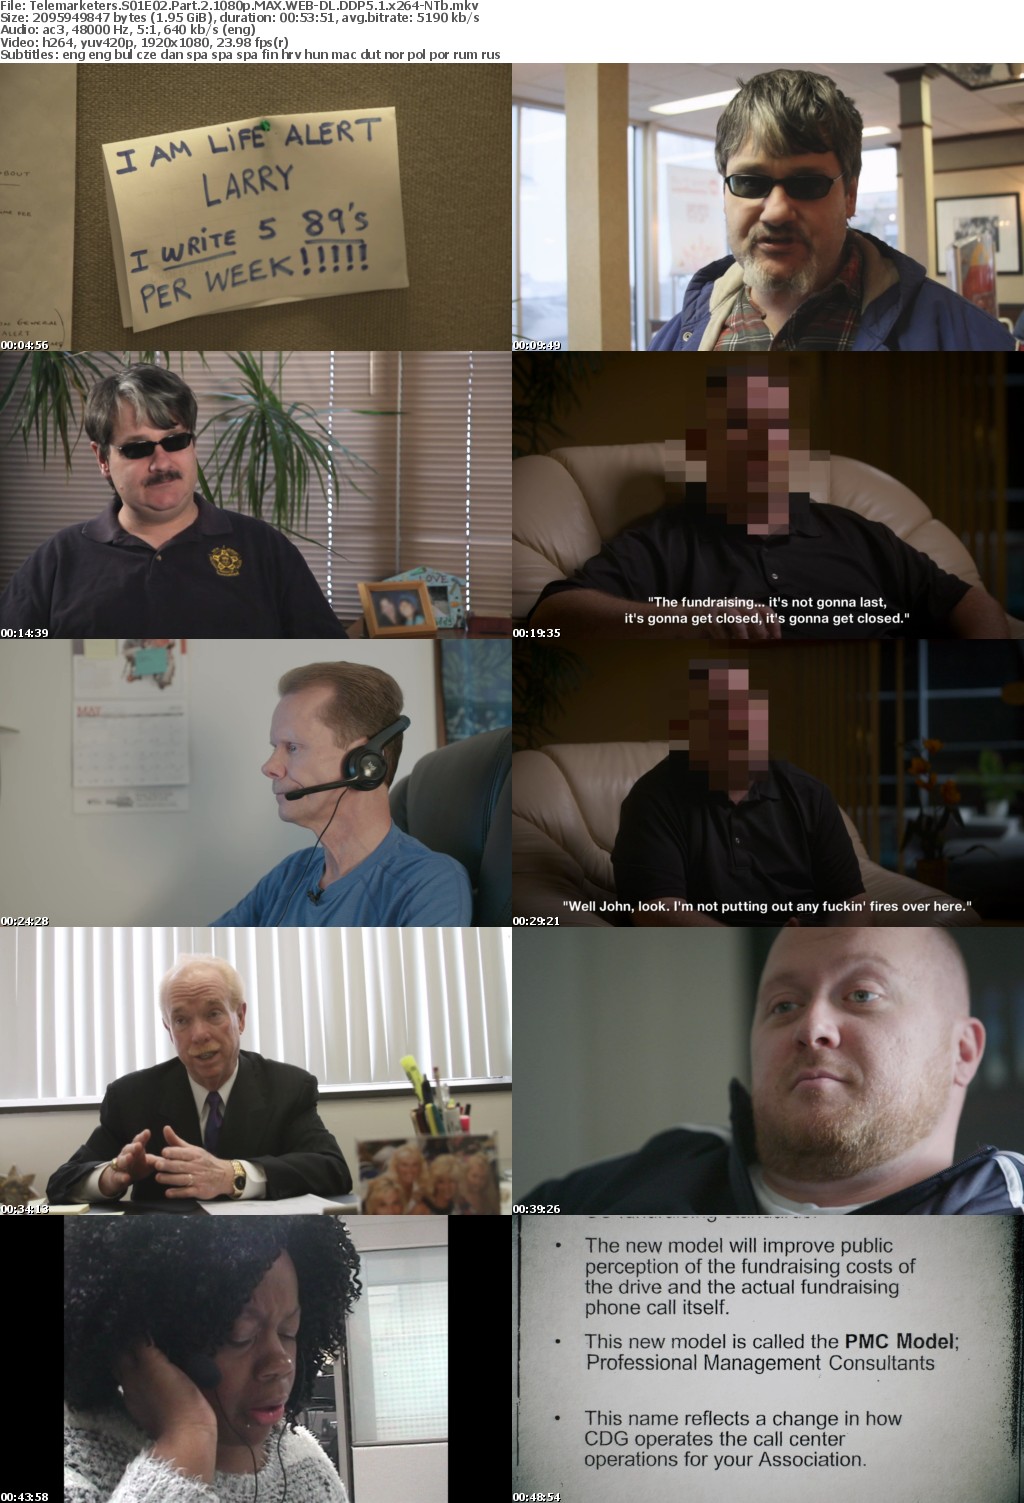 Telemarketers S01E02 Part 2 1080p MAX WEB-DL DDP5 1 x264-NTb